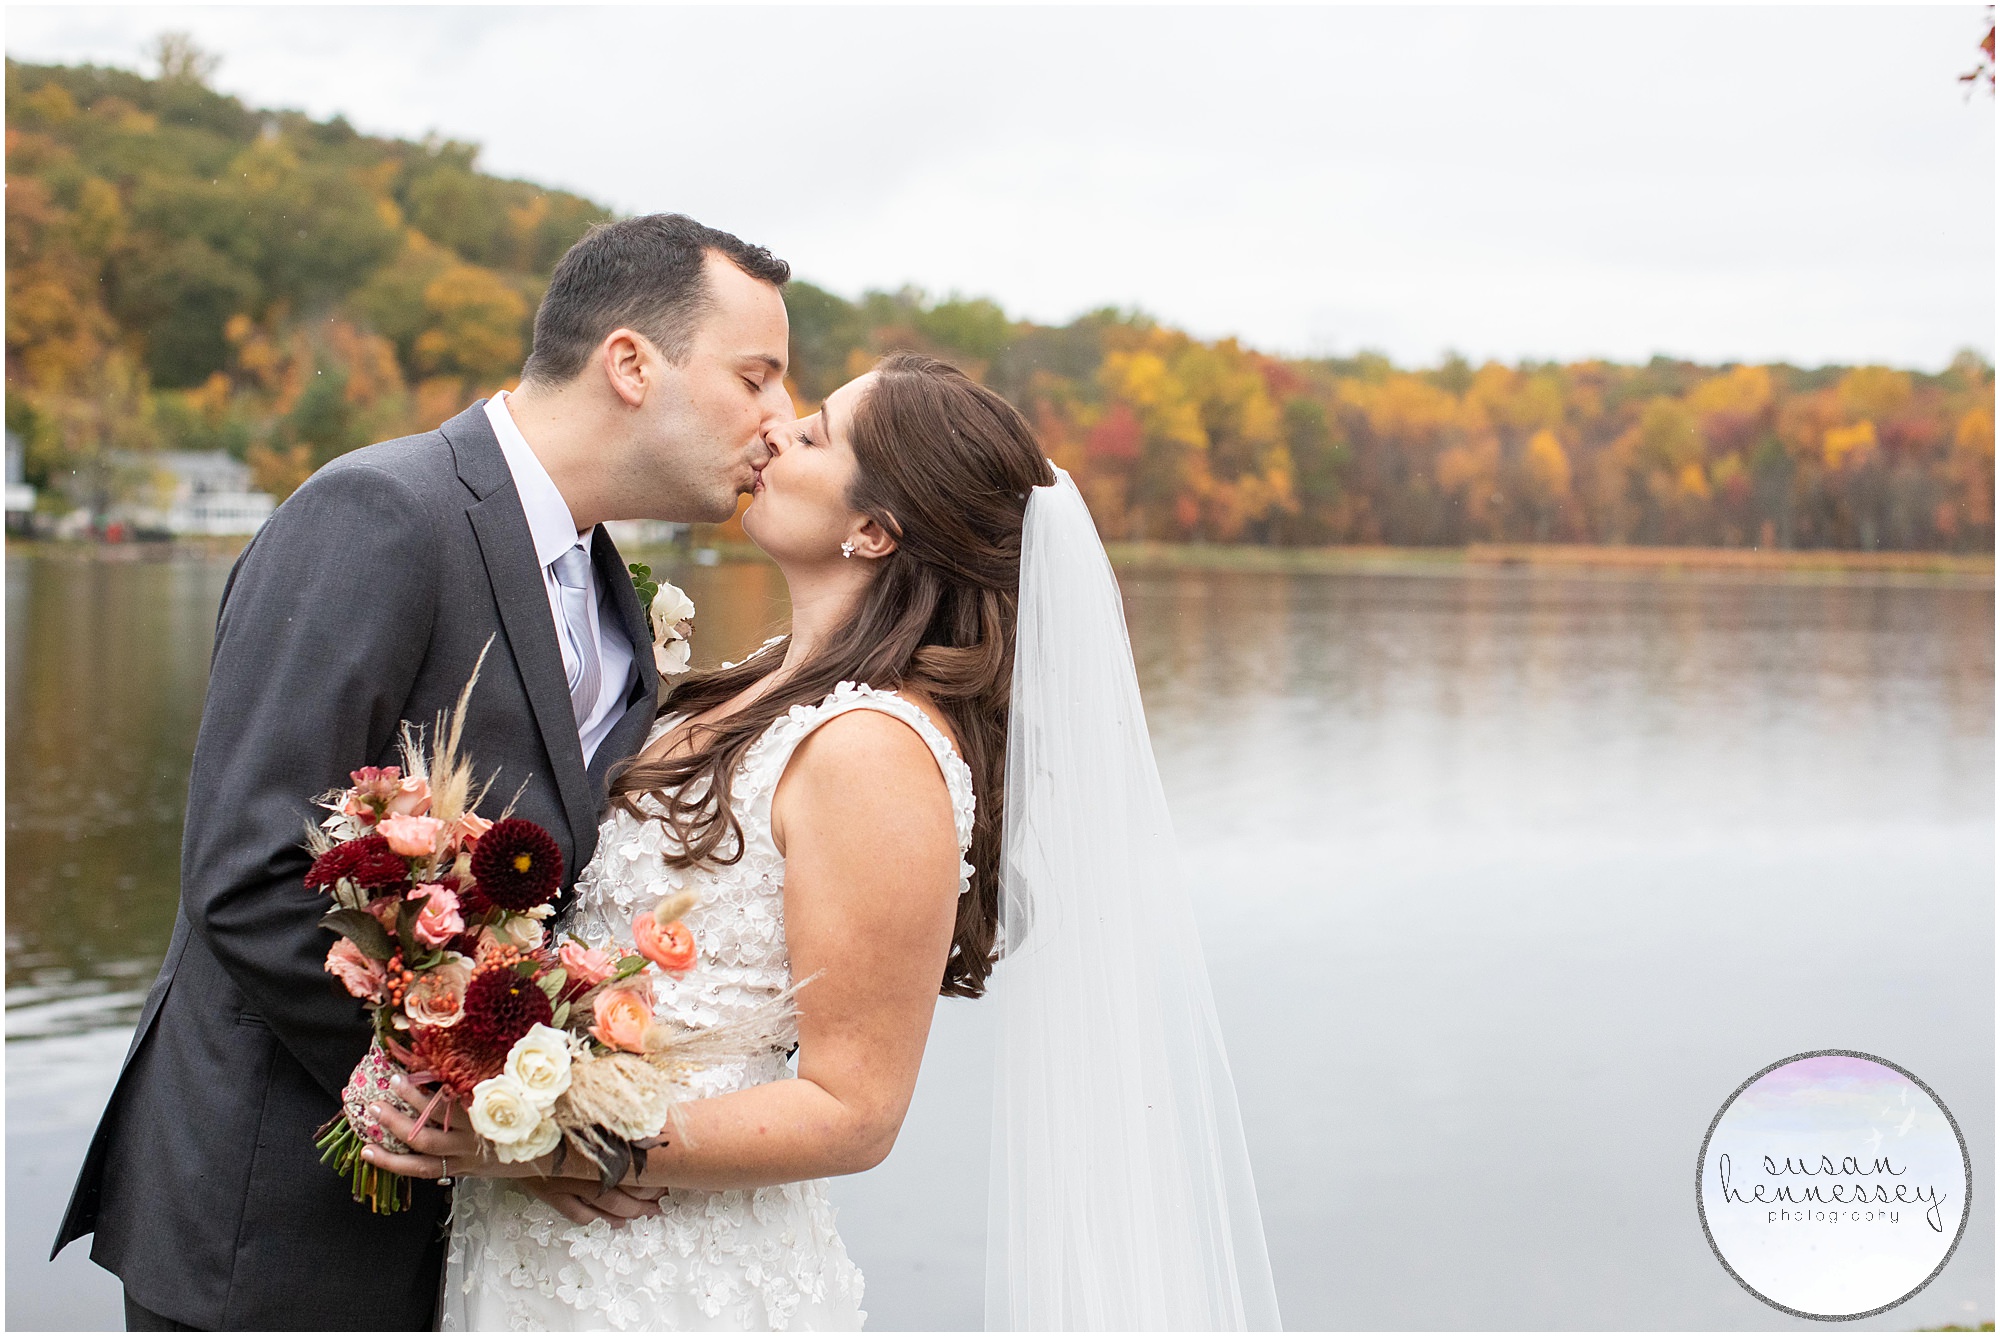 Cassie and Michael had an Andre's Lakeside Dining Microwedding